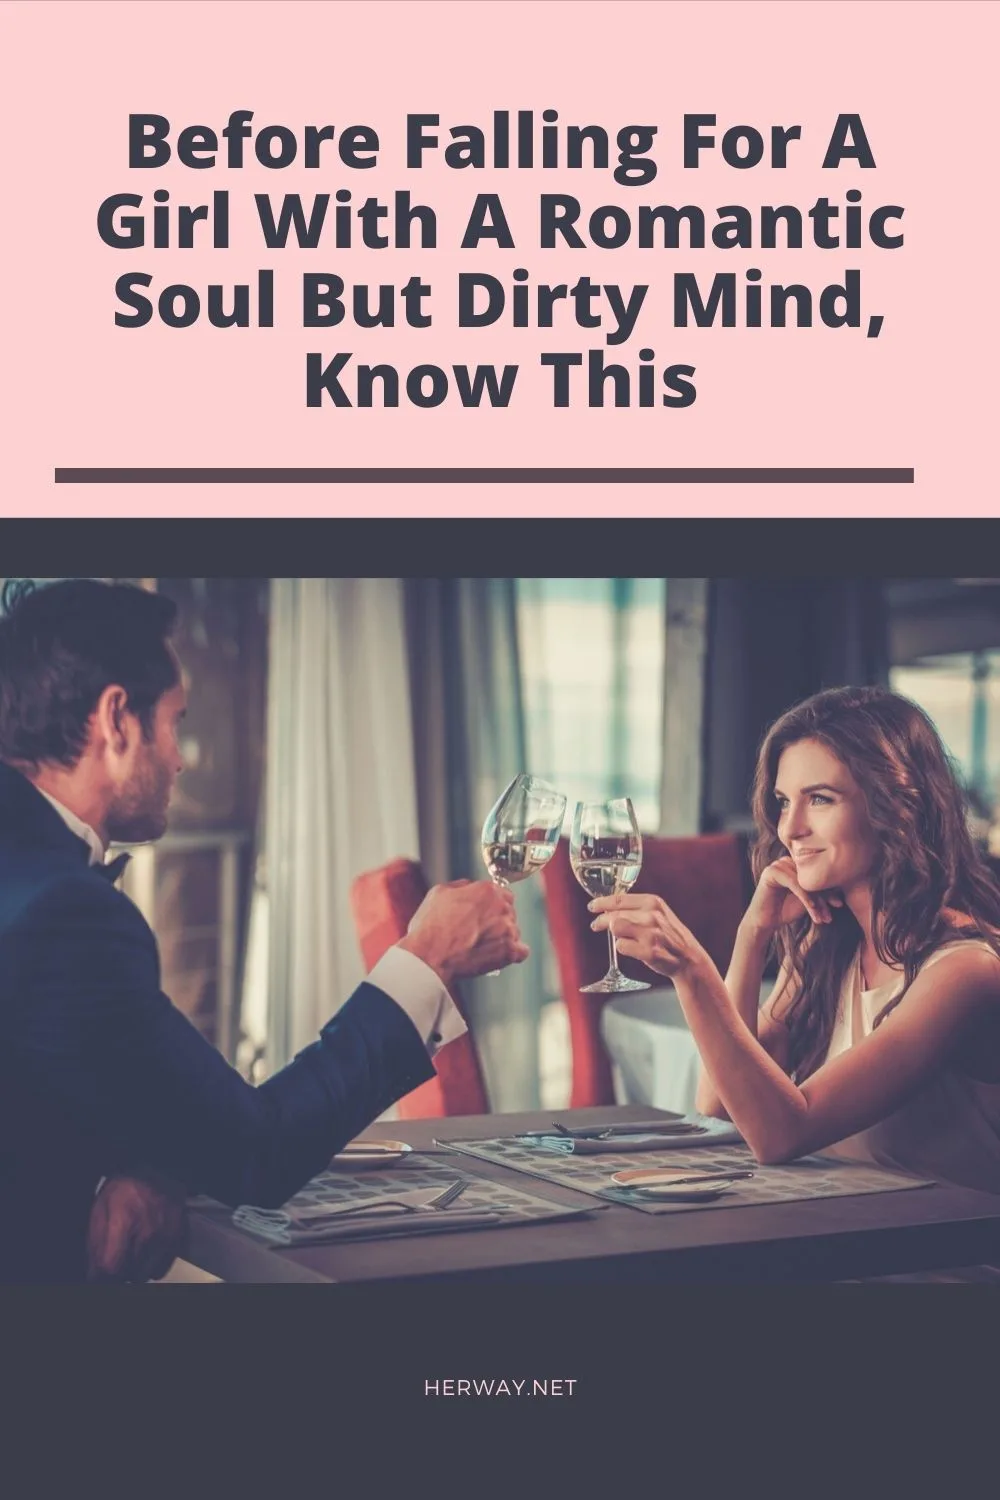 Before Falling For A Girl With A Romantic Soul But Dirty Mind, Know This